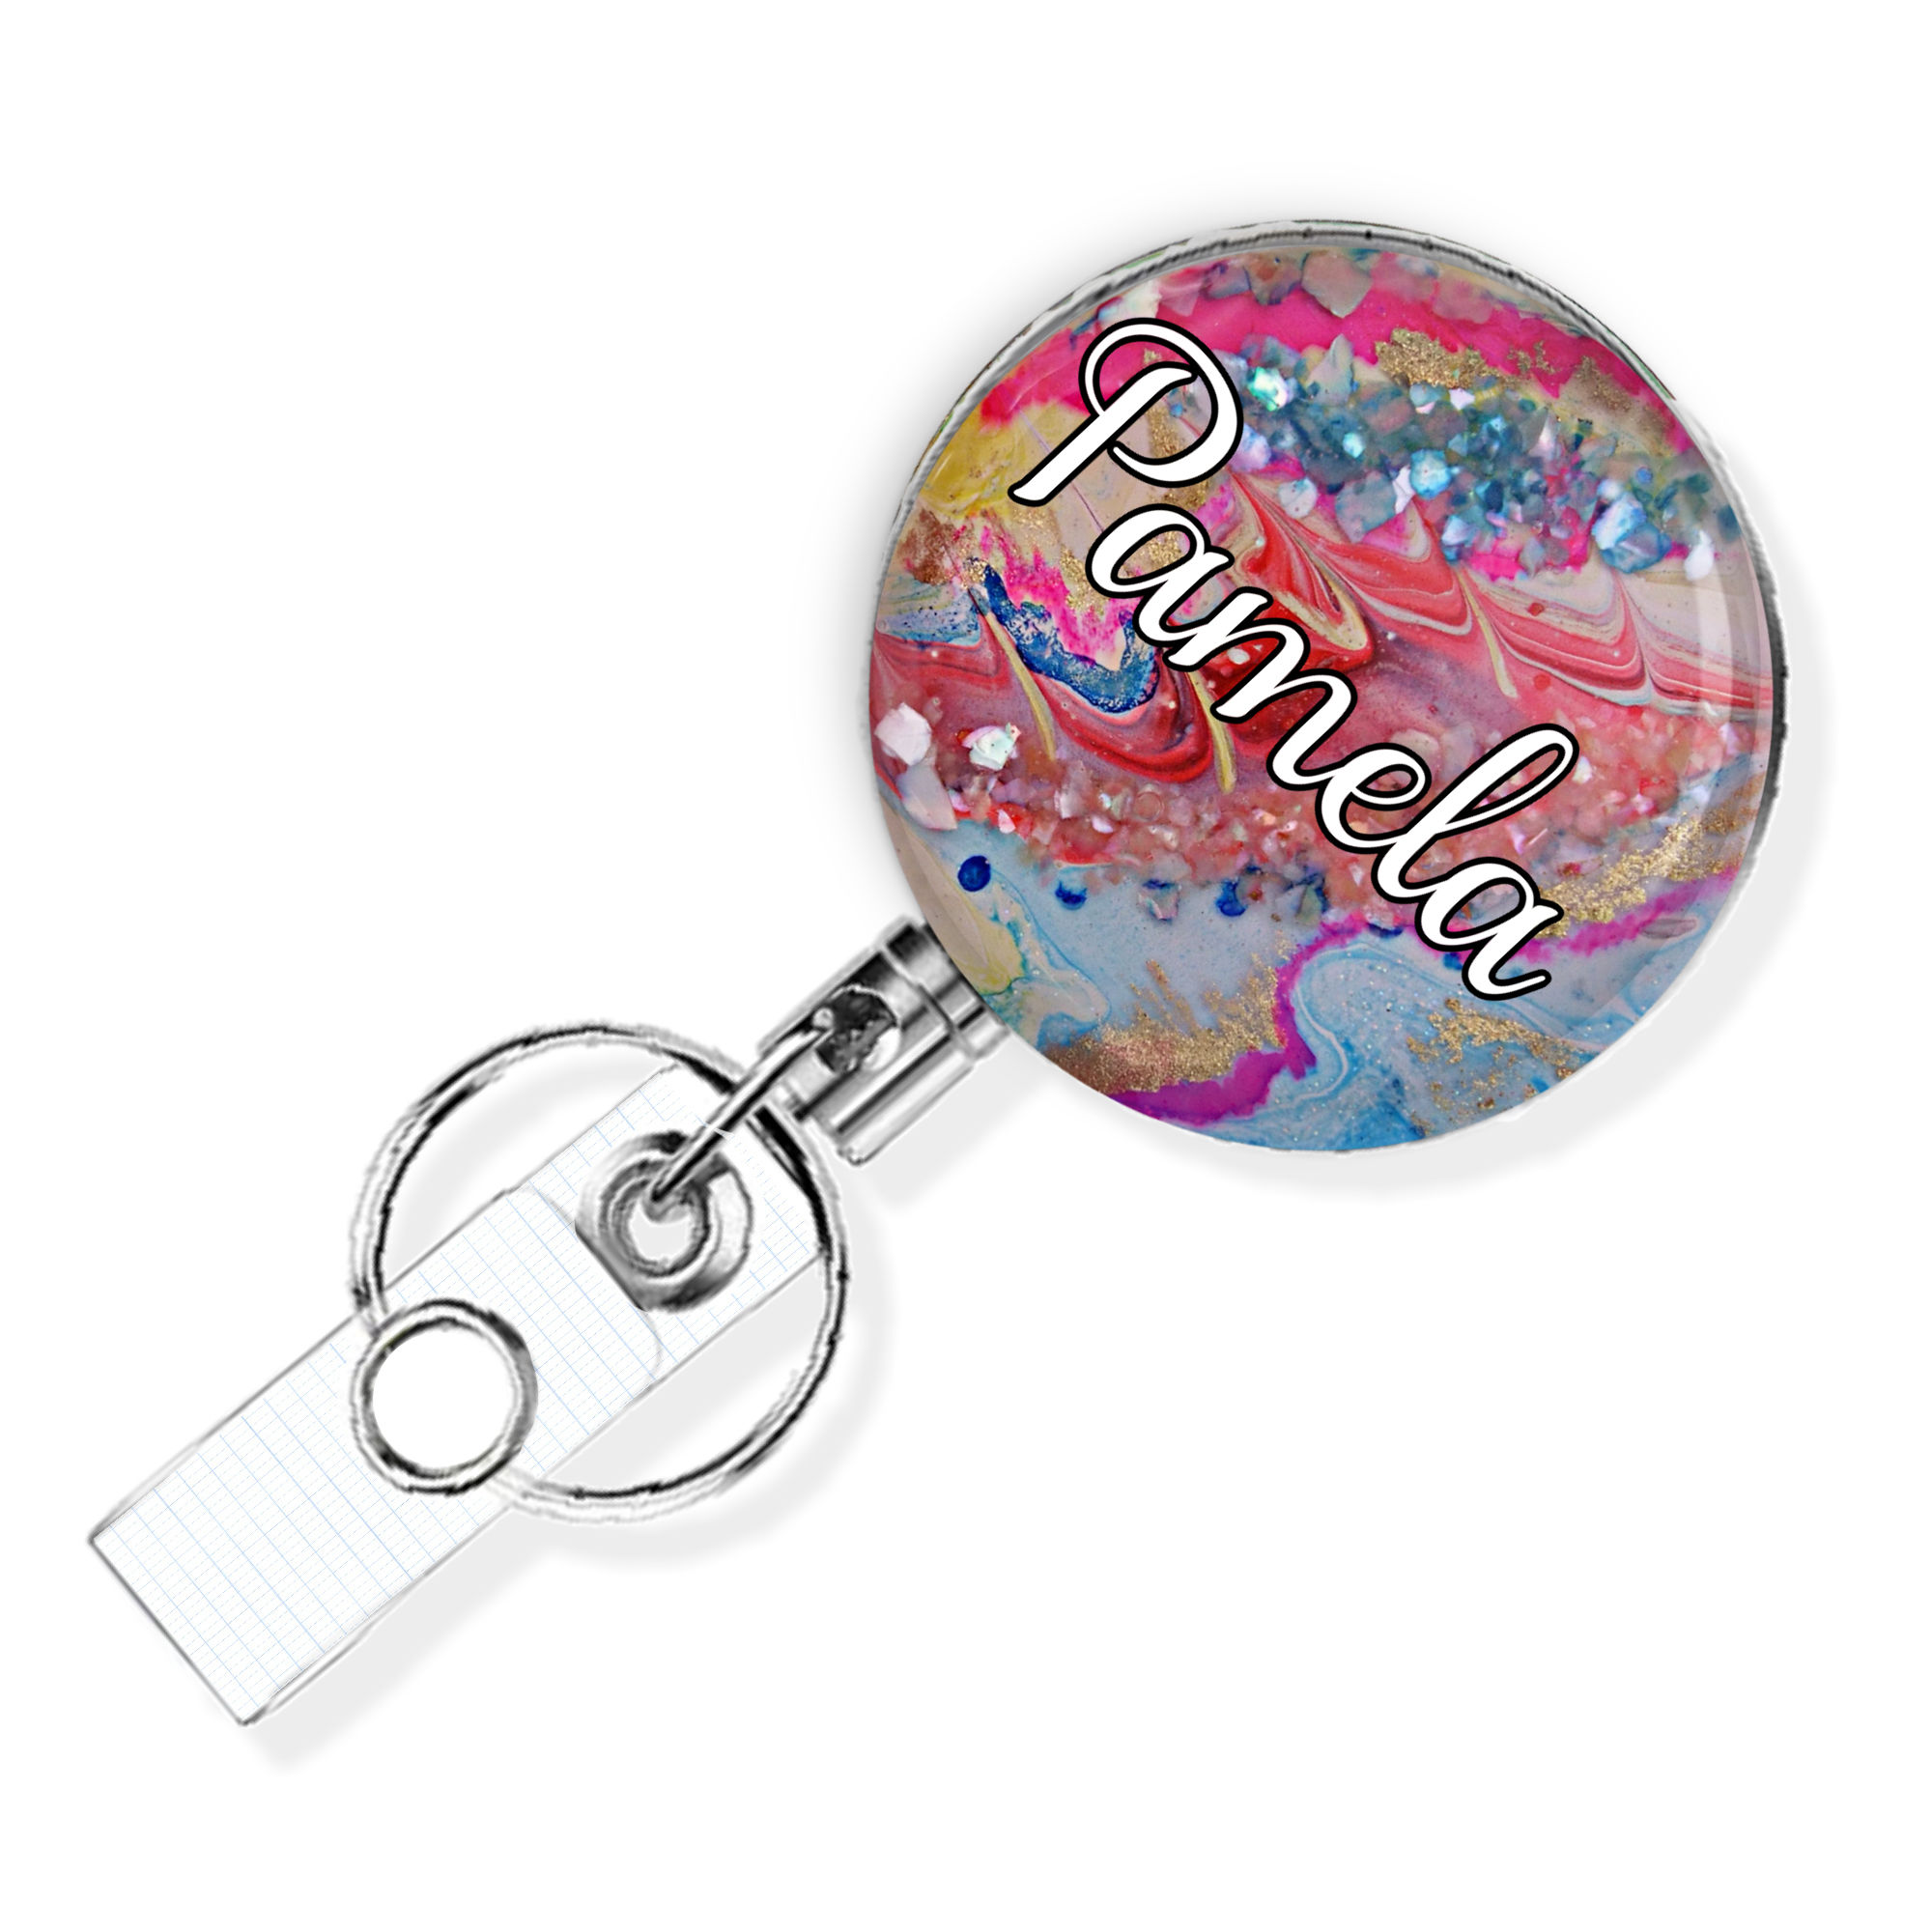 Personalized badge reel gift for teacher, name tag holder